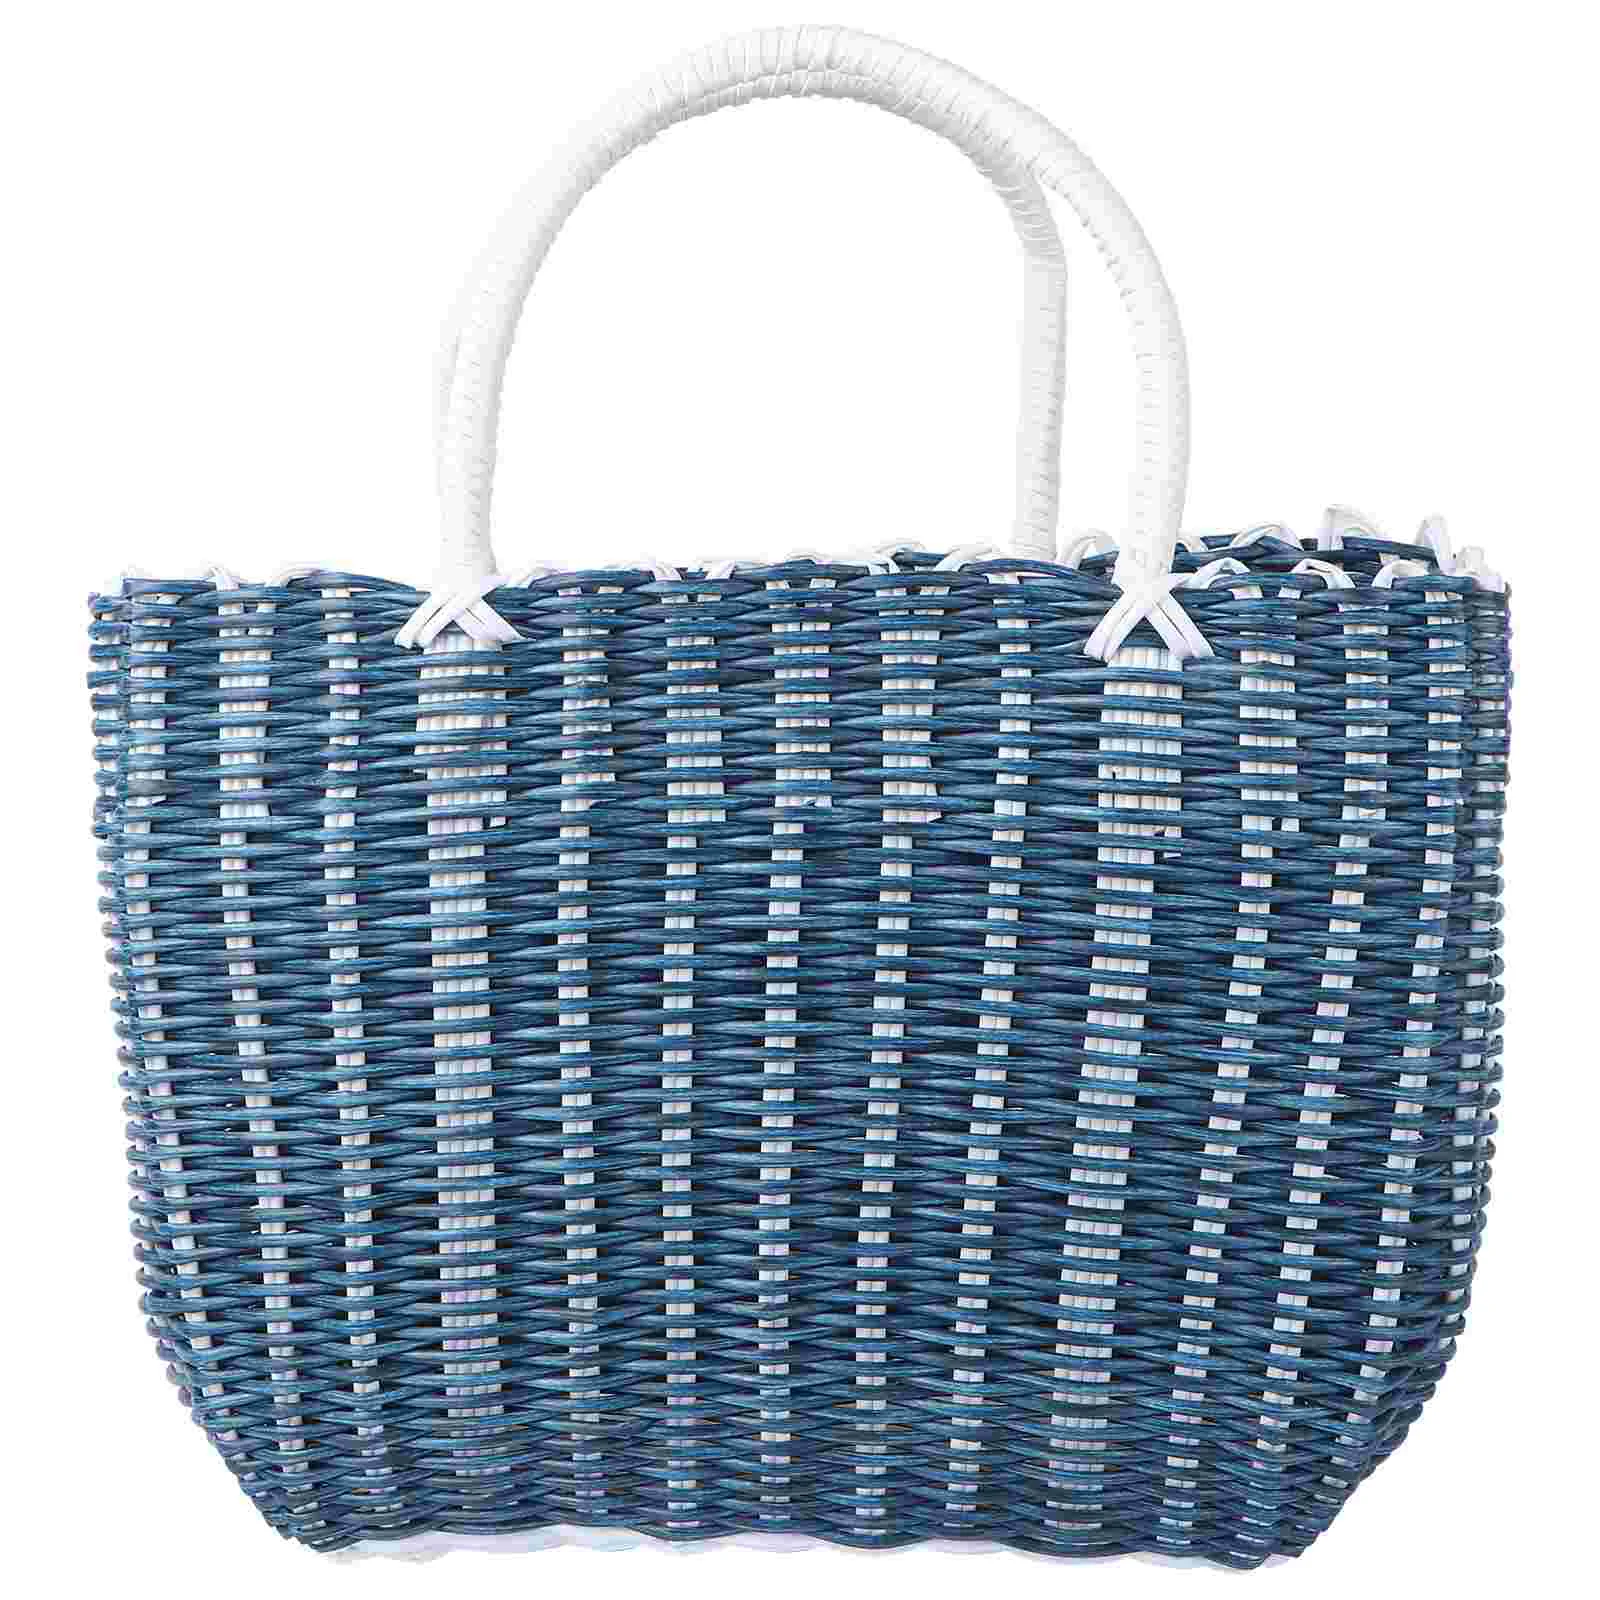 

Basket Woven Bag Shopping Toteplastic Market Handle Grocery Beach Bags Storage Picnic Handles Straw Baskets Rattan Wicker Shower